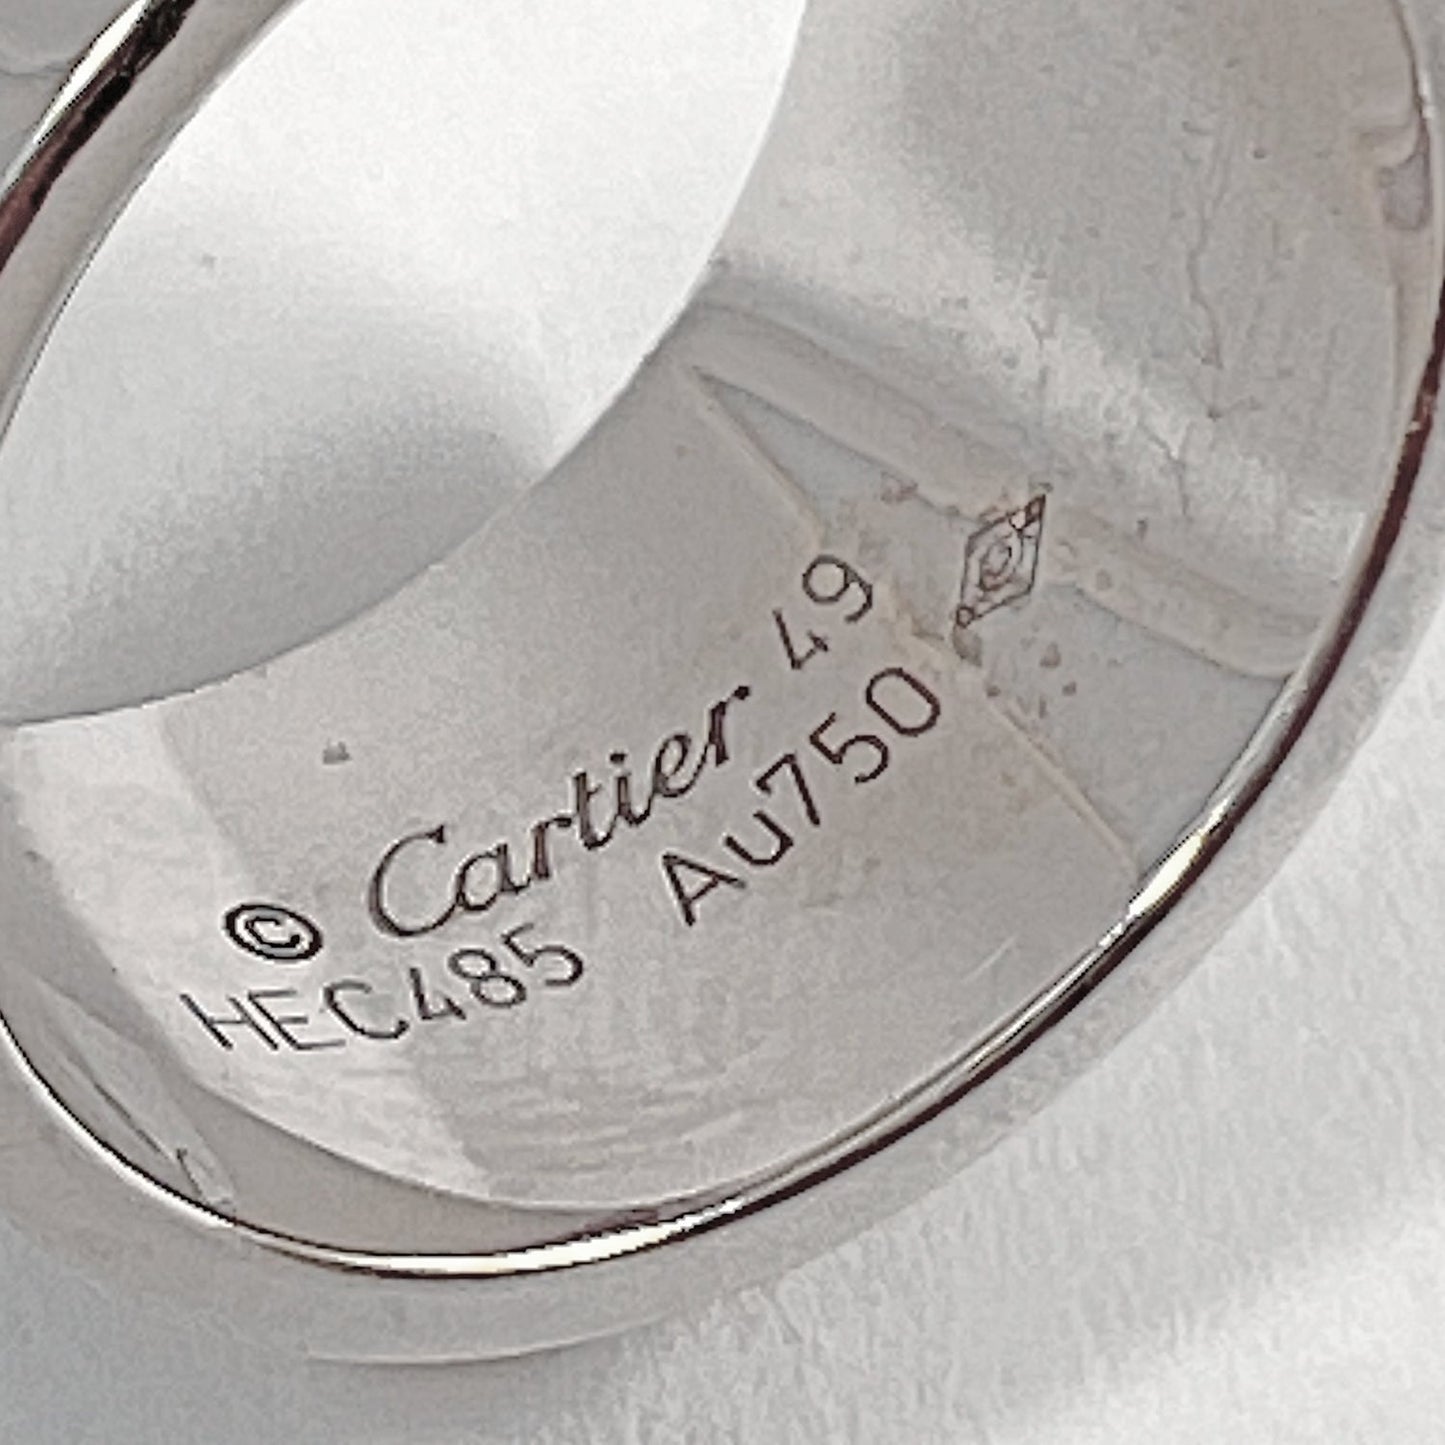 Cartier - 18k White Gold Wide LOVE Band Ring